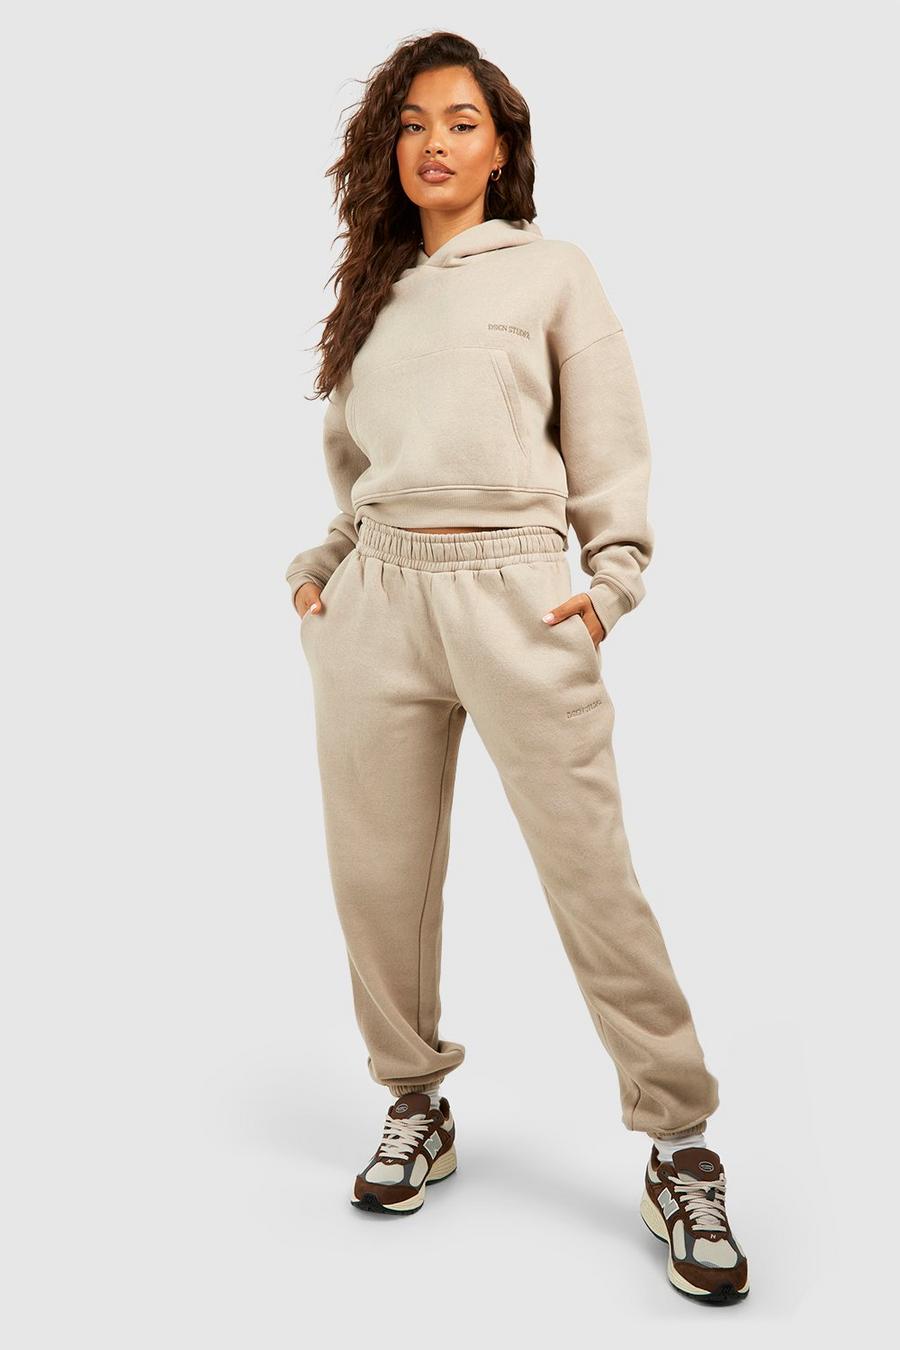 Stone DSGN Studio Embroidered Cropped Hooded Tracksuits 